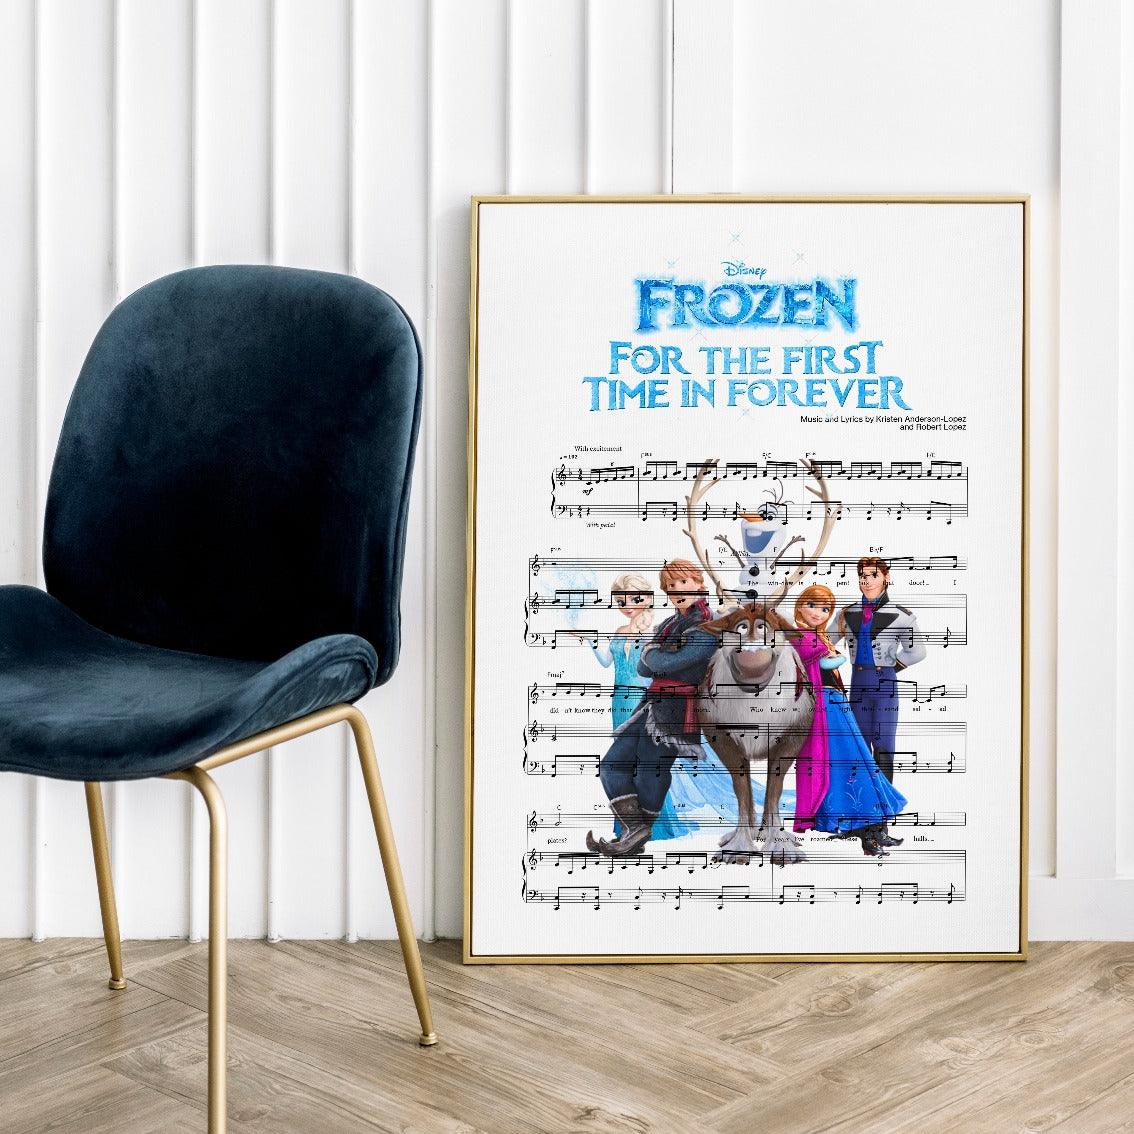 Let your favorite song lyrics take center stage with our custom Frozen-For the First Time in Forever Poster! This hand-crafted poster designed with love, offers a fun way to spruce up any room in your home! With a wide range of music lyrics from any song you can imagine, you'll get the party started with a fun and quirky wall print that will make all your friends envious!